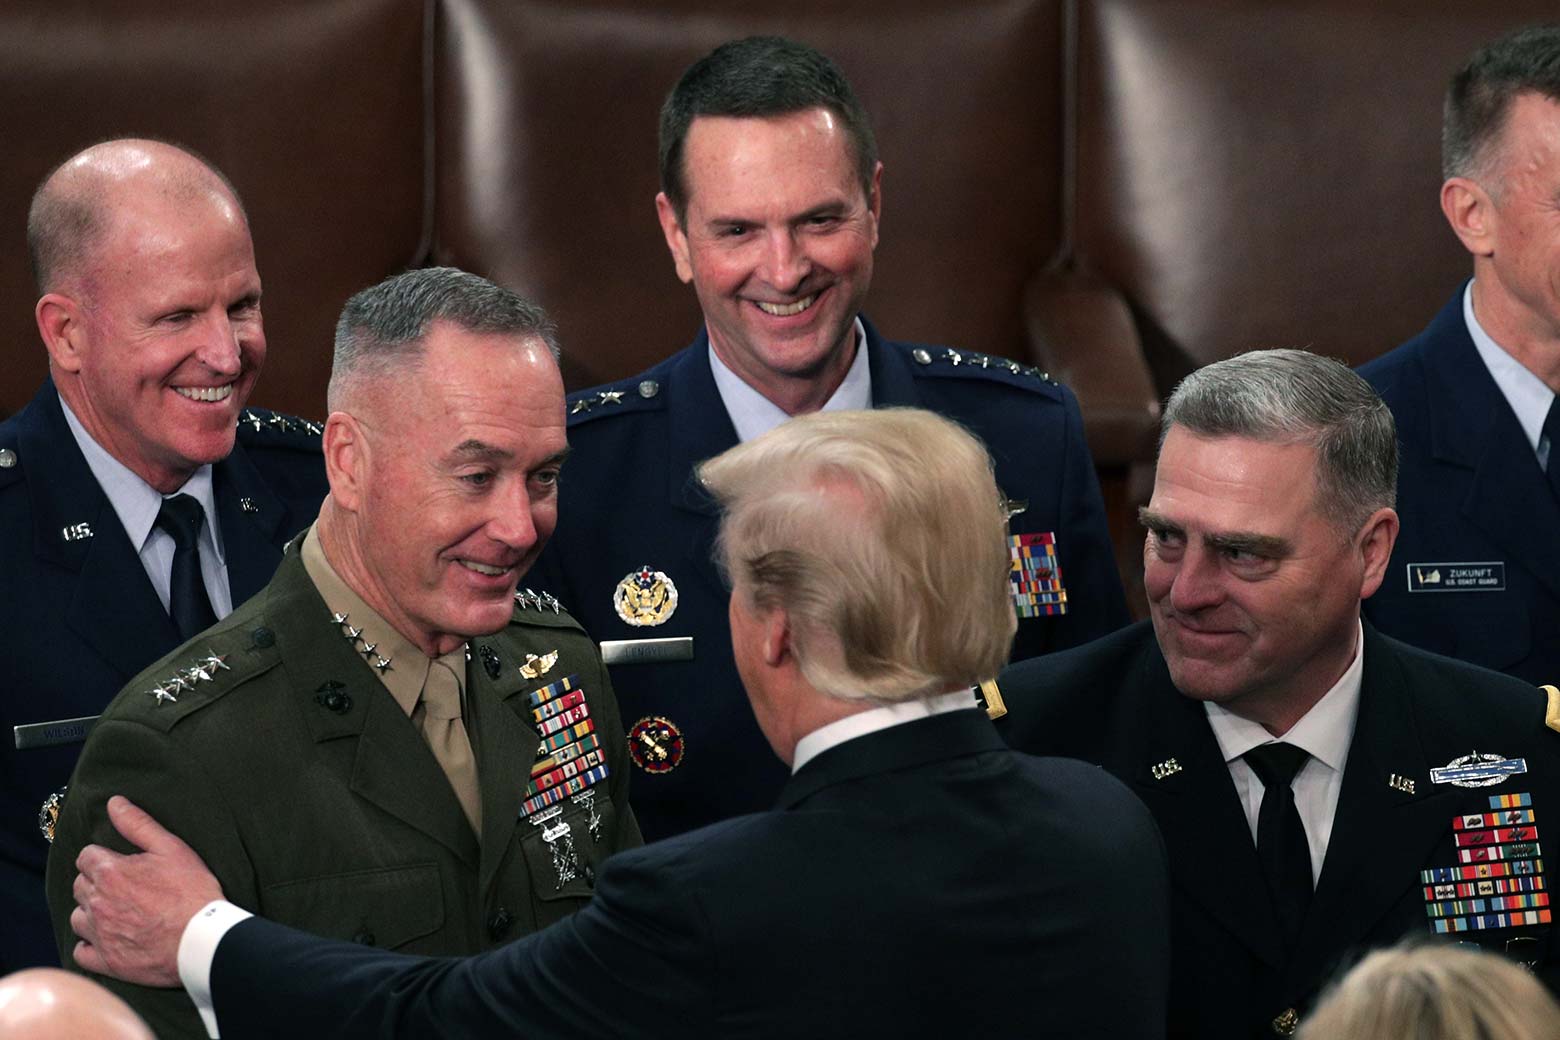 Trump greeting Dunford and other military officials.